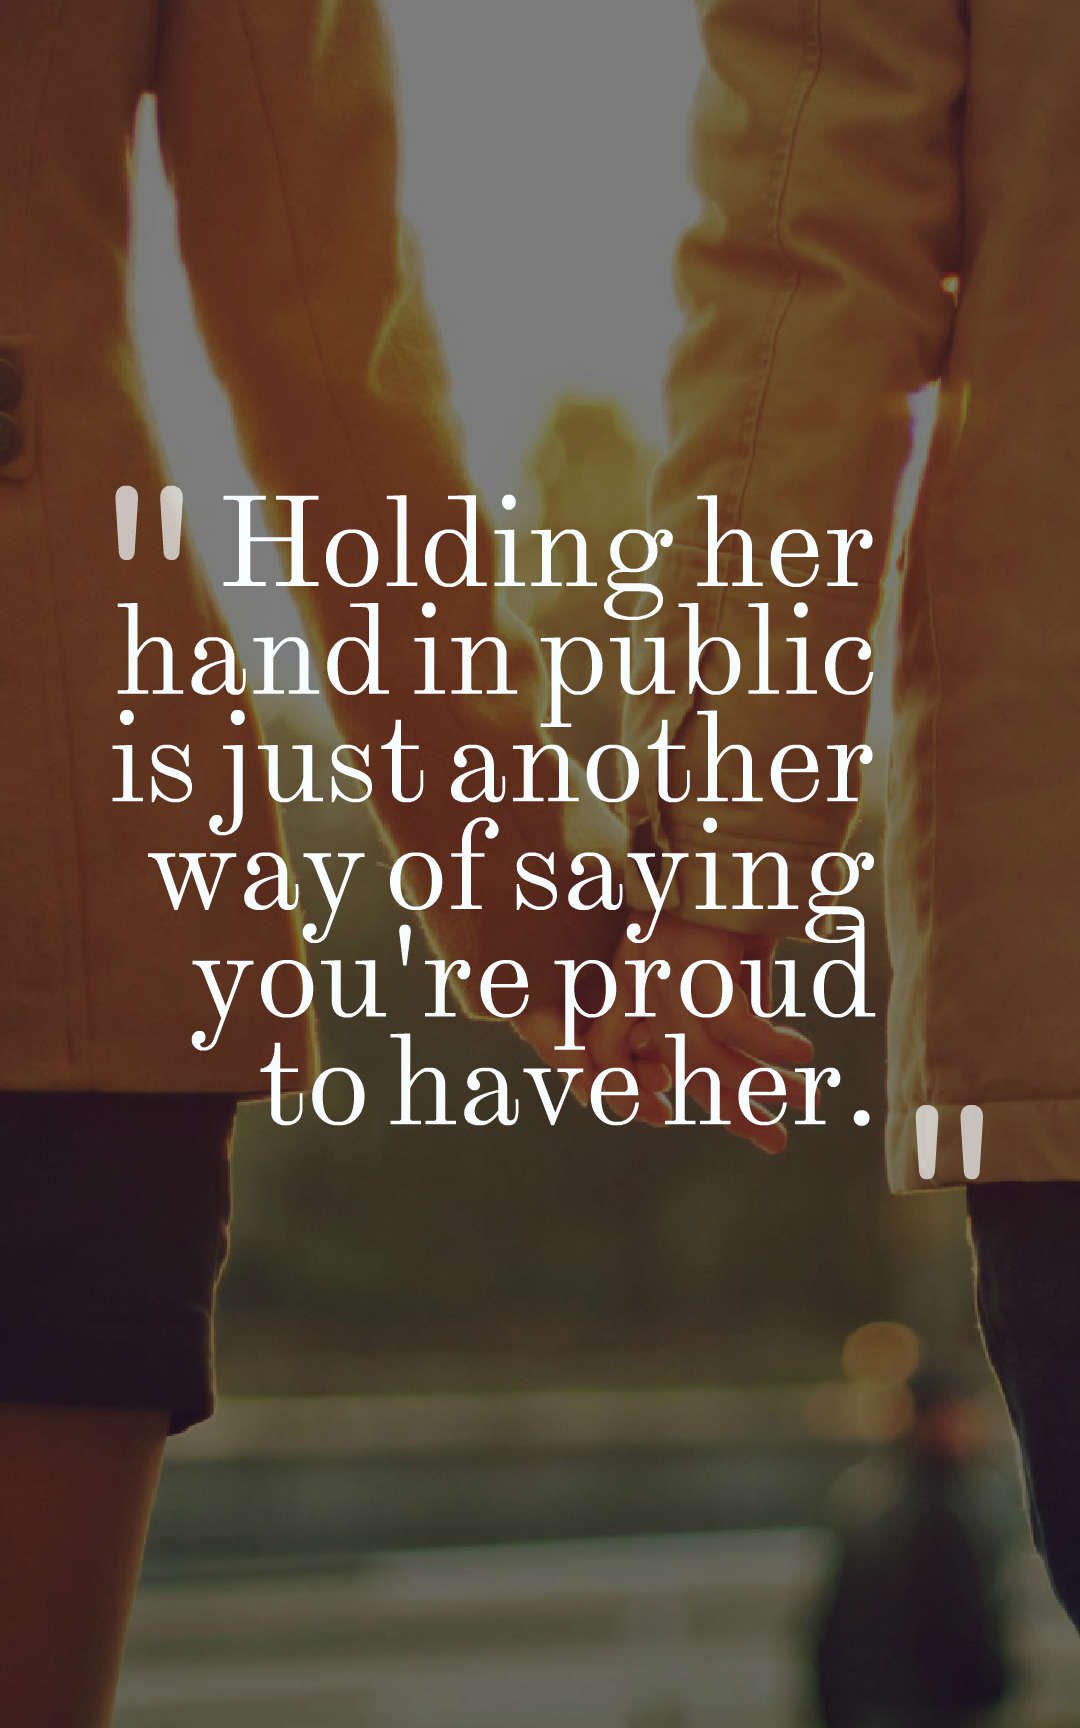 Holding her hand in public is just another way of saying you're proud to have her.